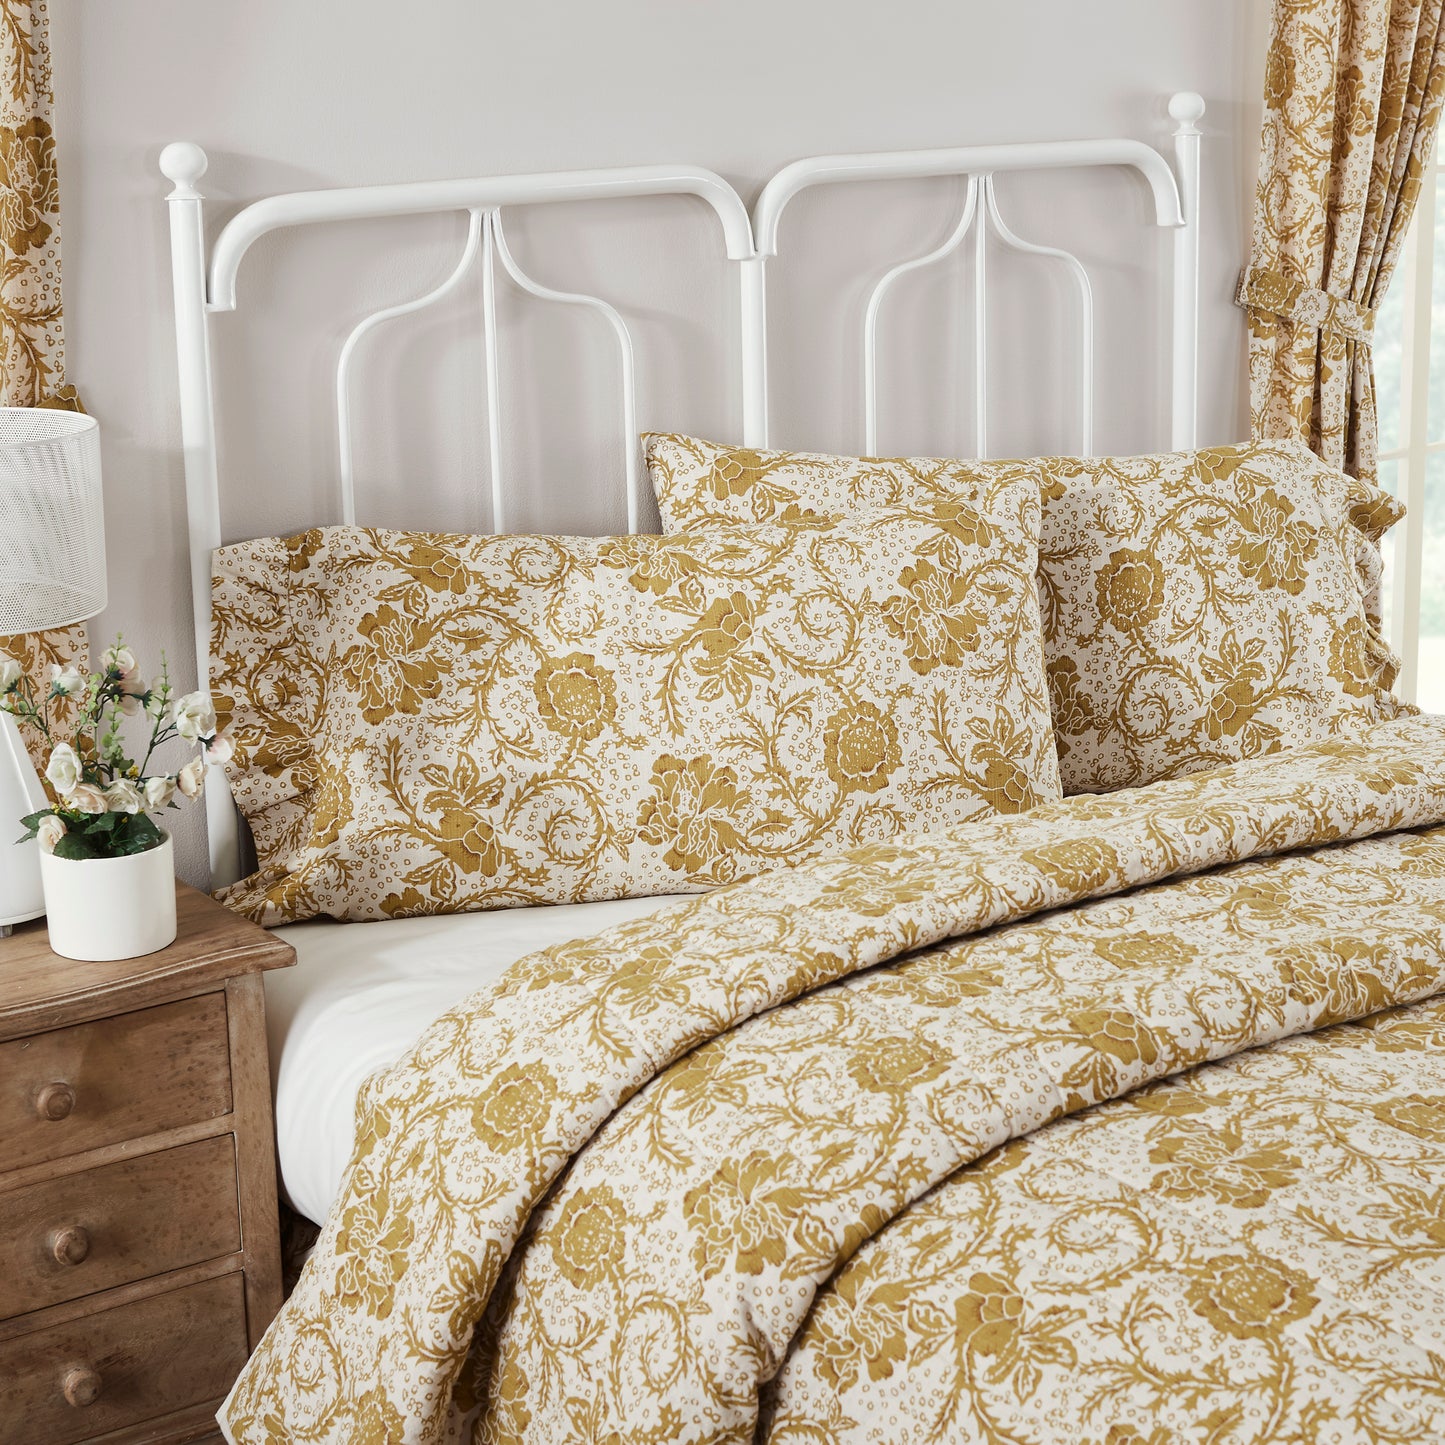 81195-Dorset-Gold-Floral-Ruffled-King-Pillow-Case-Set-of-2-21x36-4-image-3